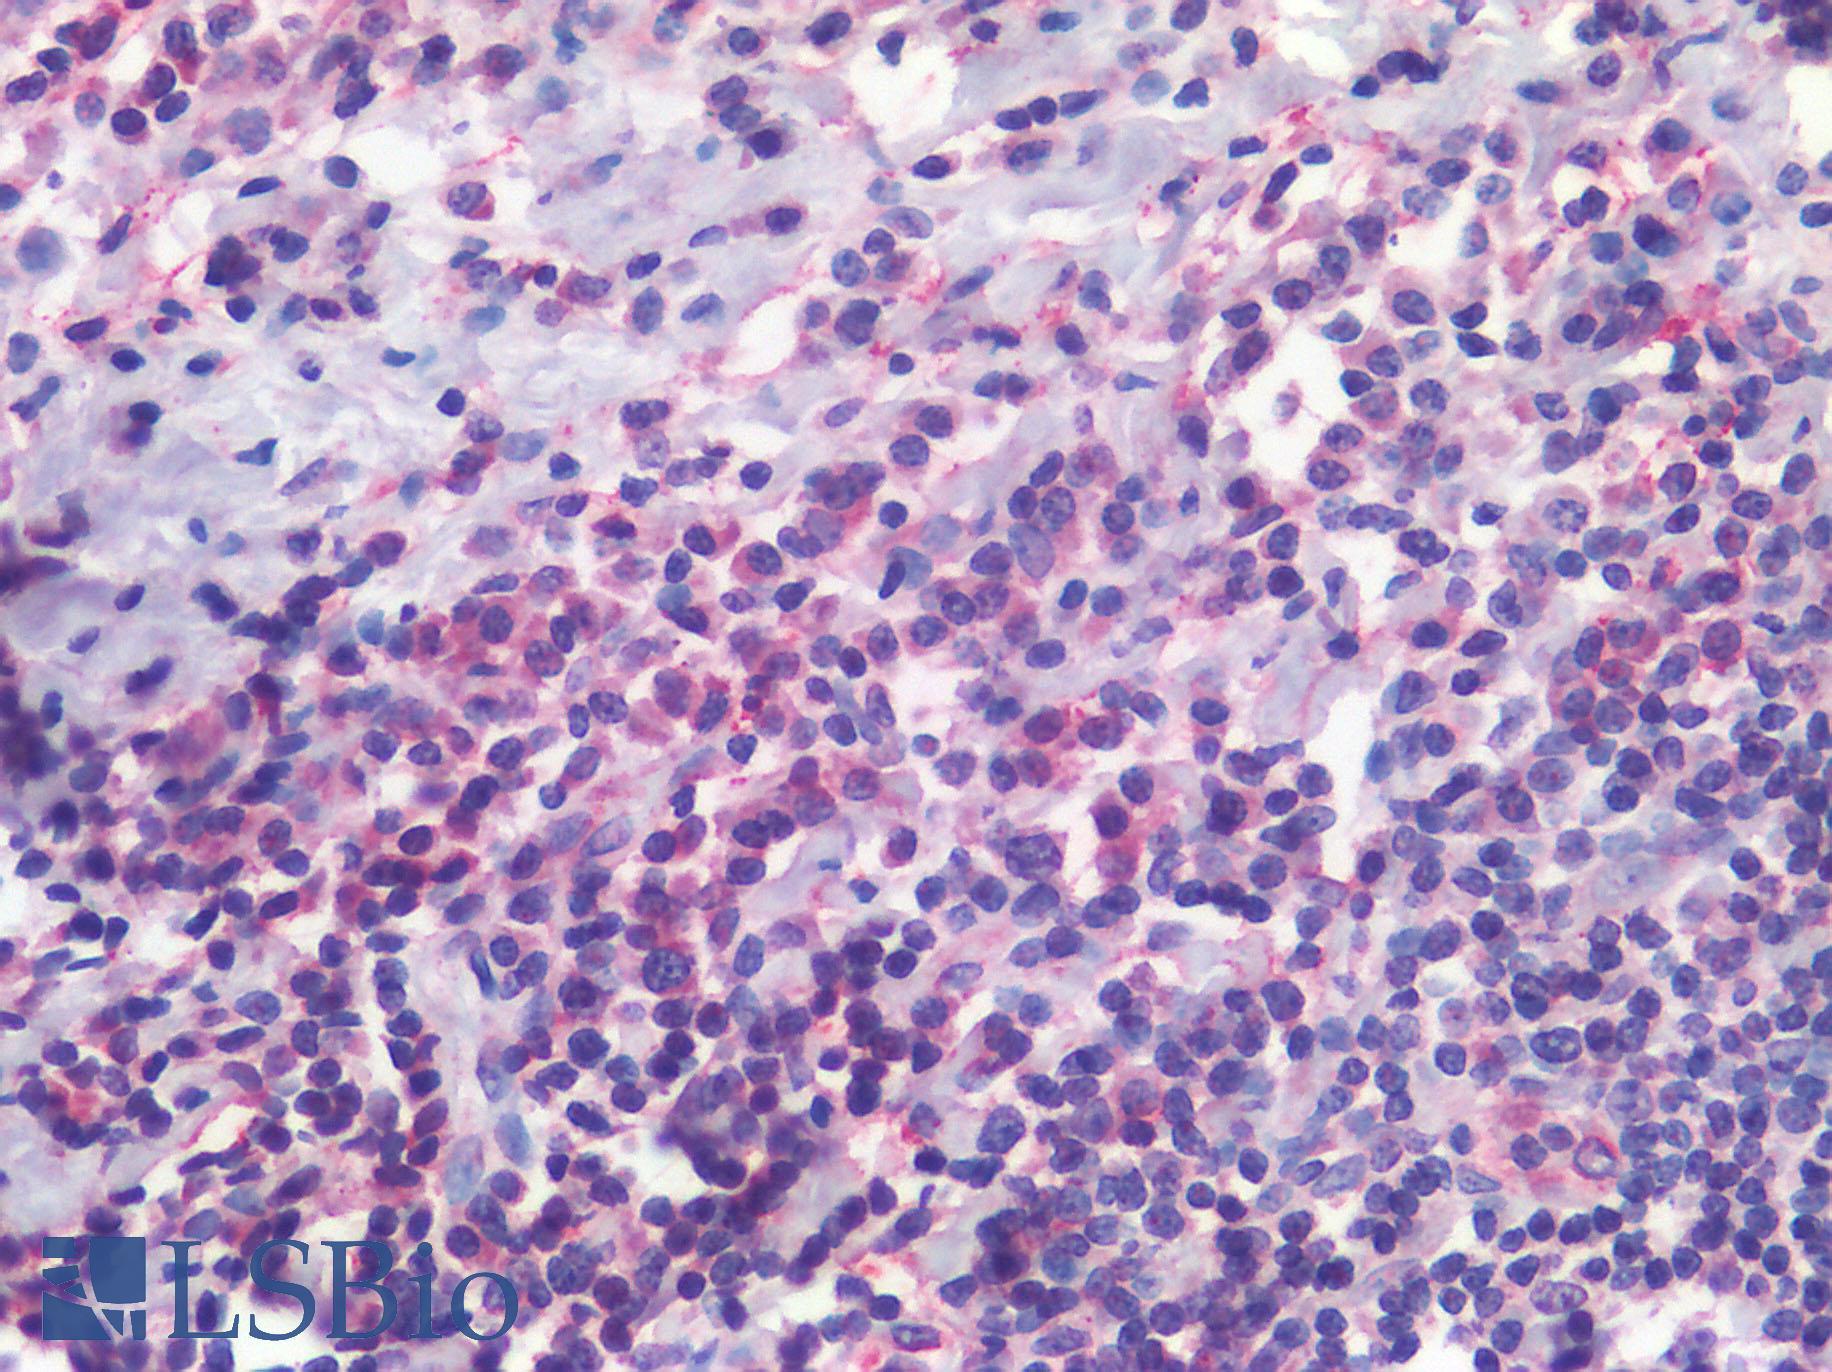 ITGAX / CD11c Antibody - Anti-CD11c antibody IHC of Human Tonsil. Positive staining within a subset of lymphocytes. Immunohistochemistry of formalin-fixed, paraffin-embedded tissue after heat-induced antigen retrieval.